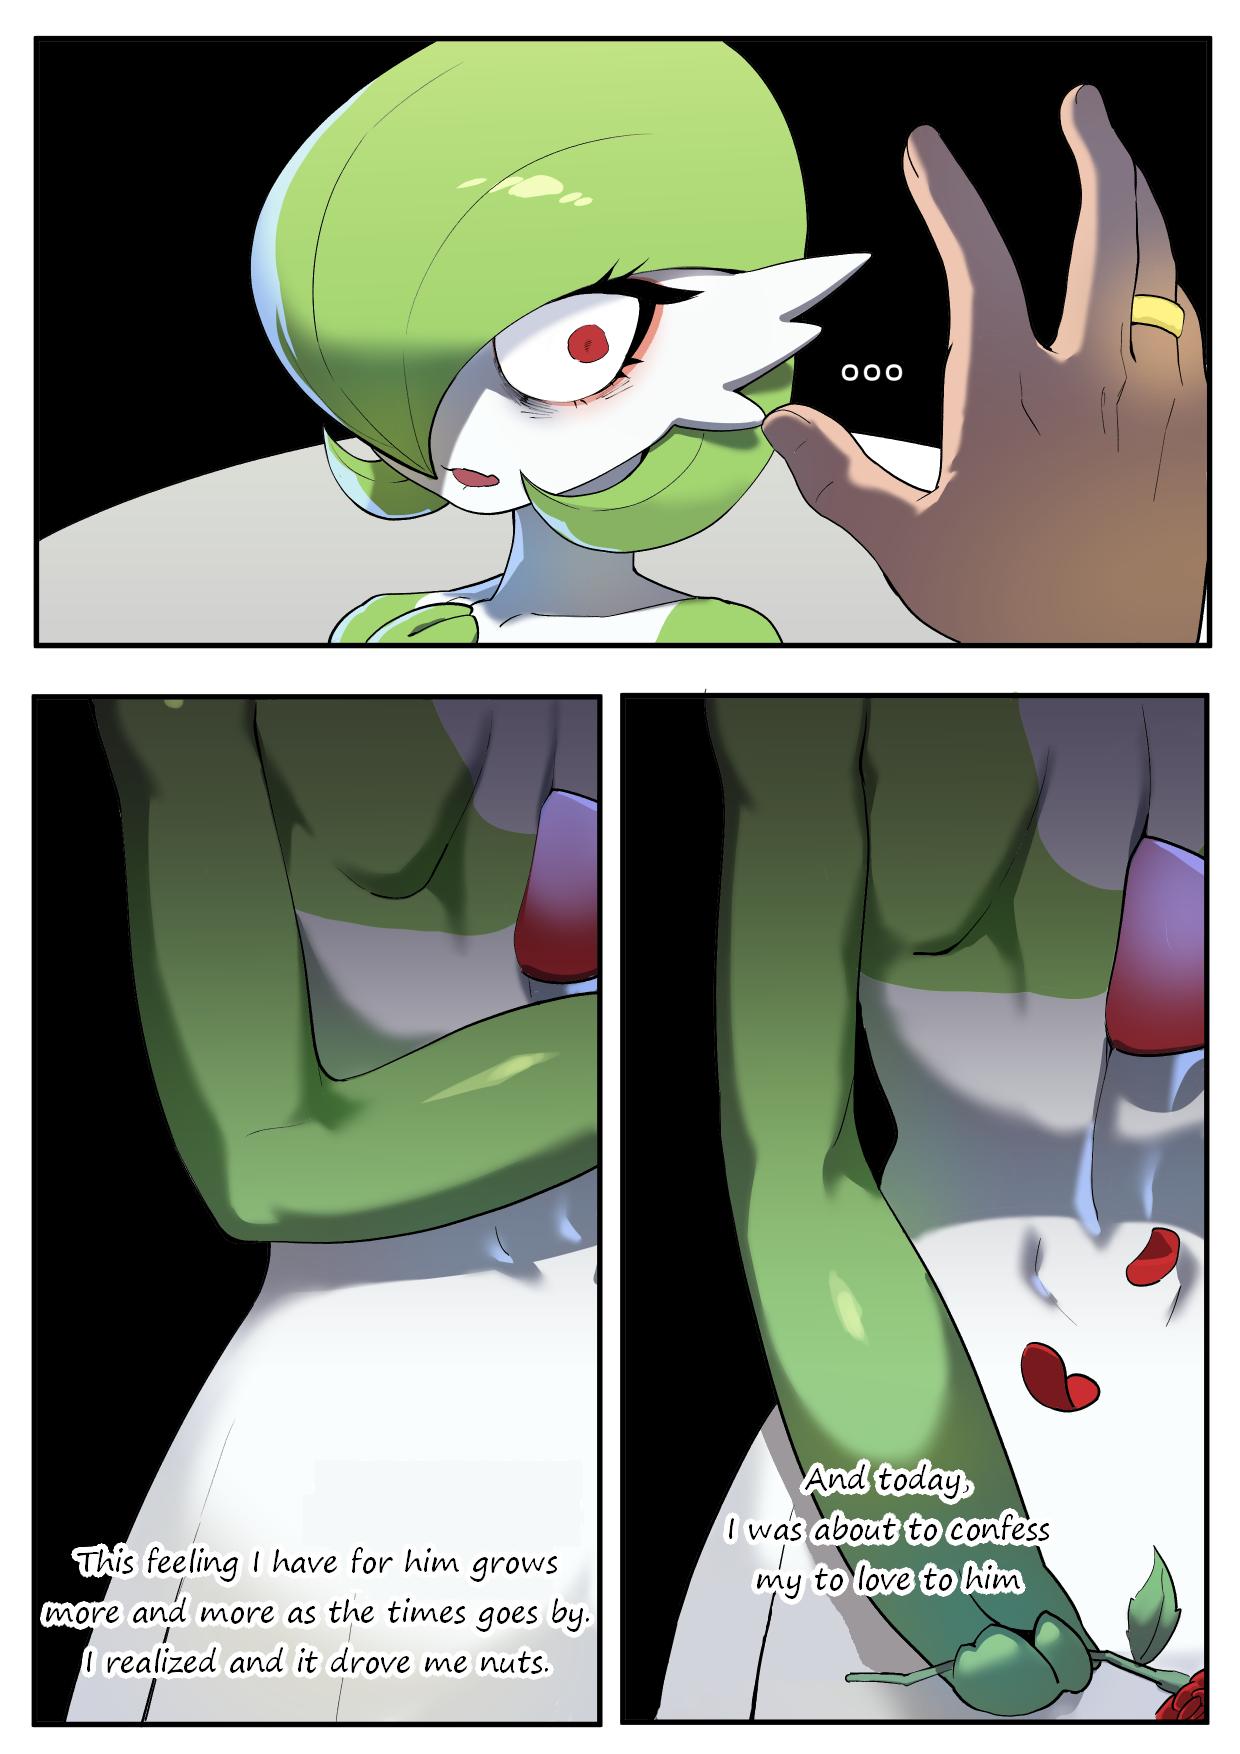 Cams The Gardevior that loved her trainer too much - Pokemon | pocket monsters Condom - Page 2